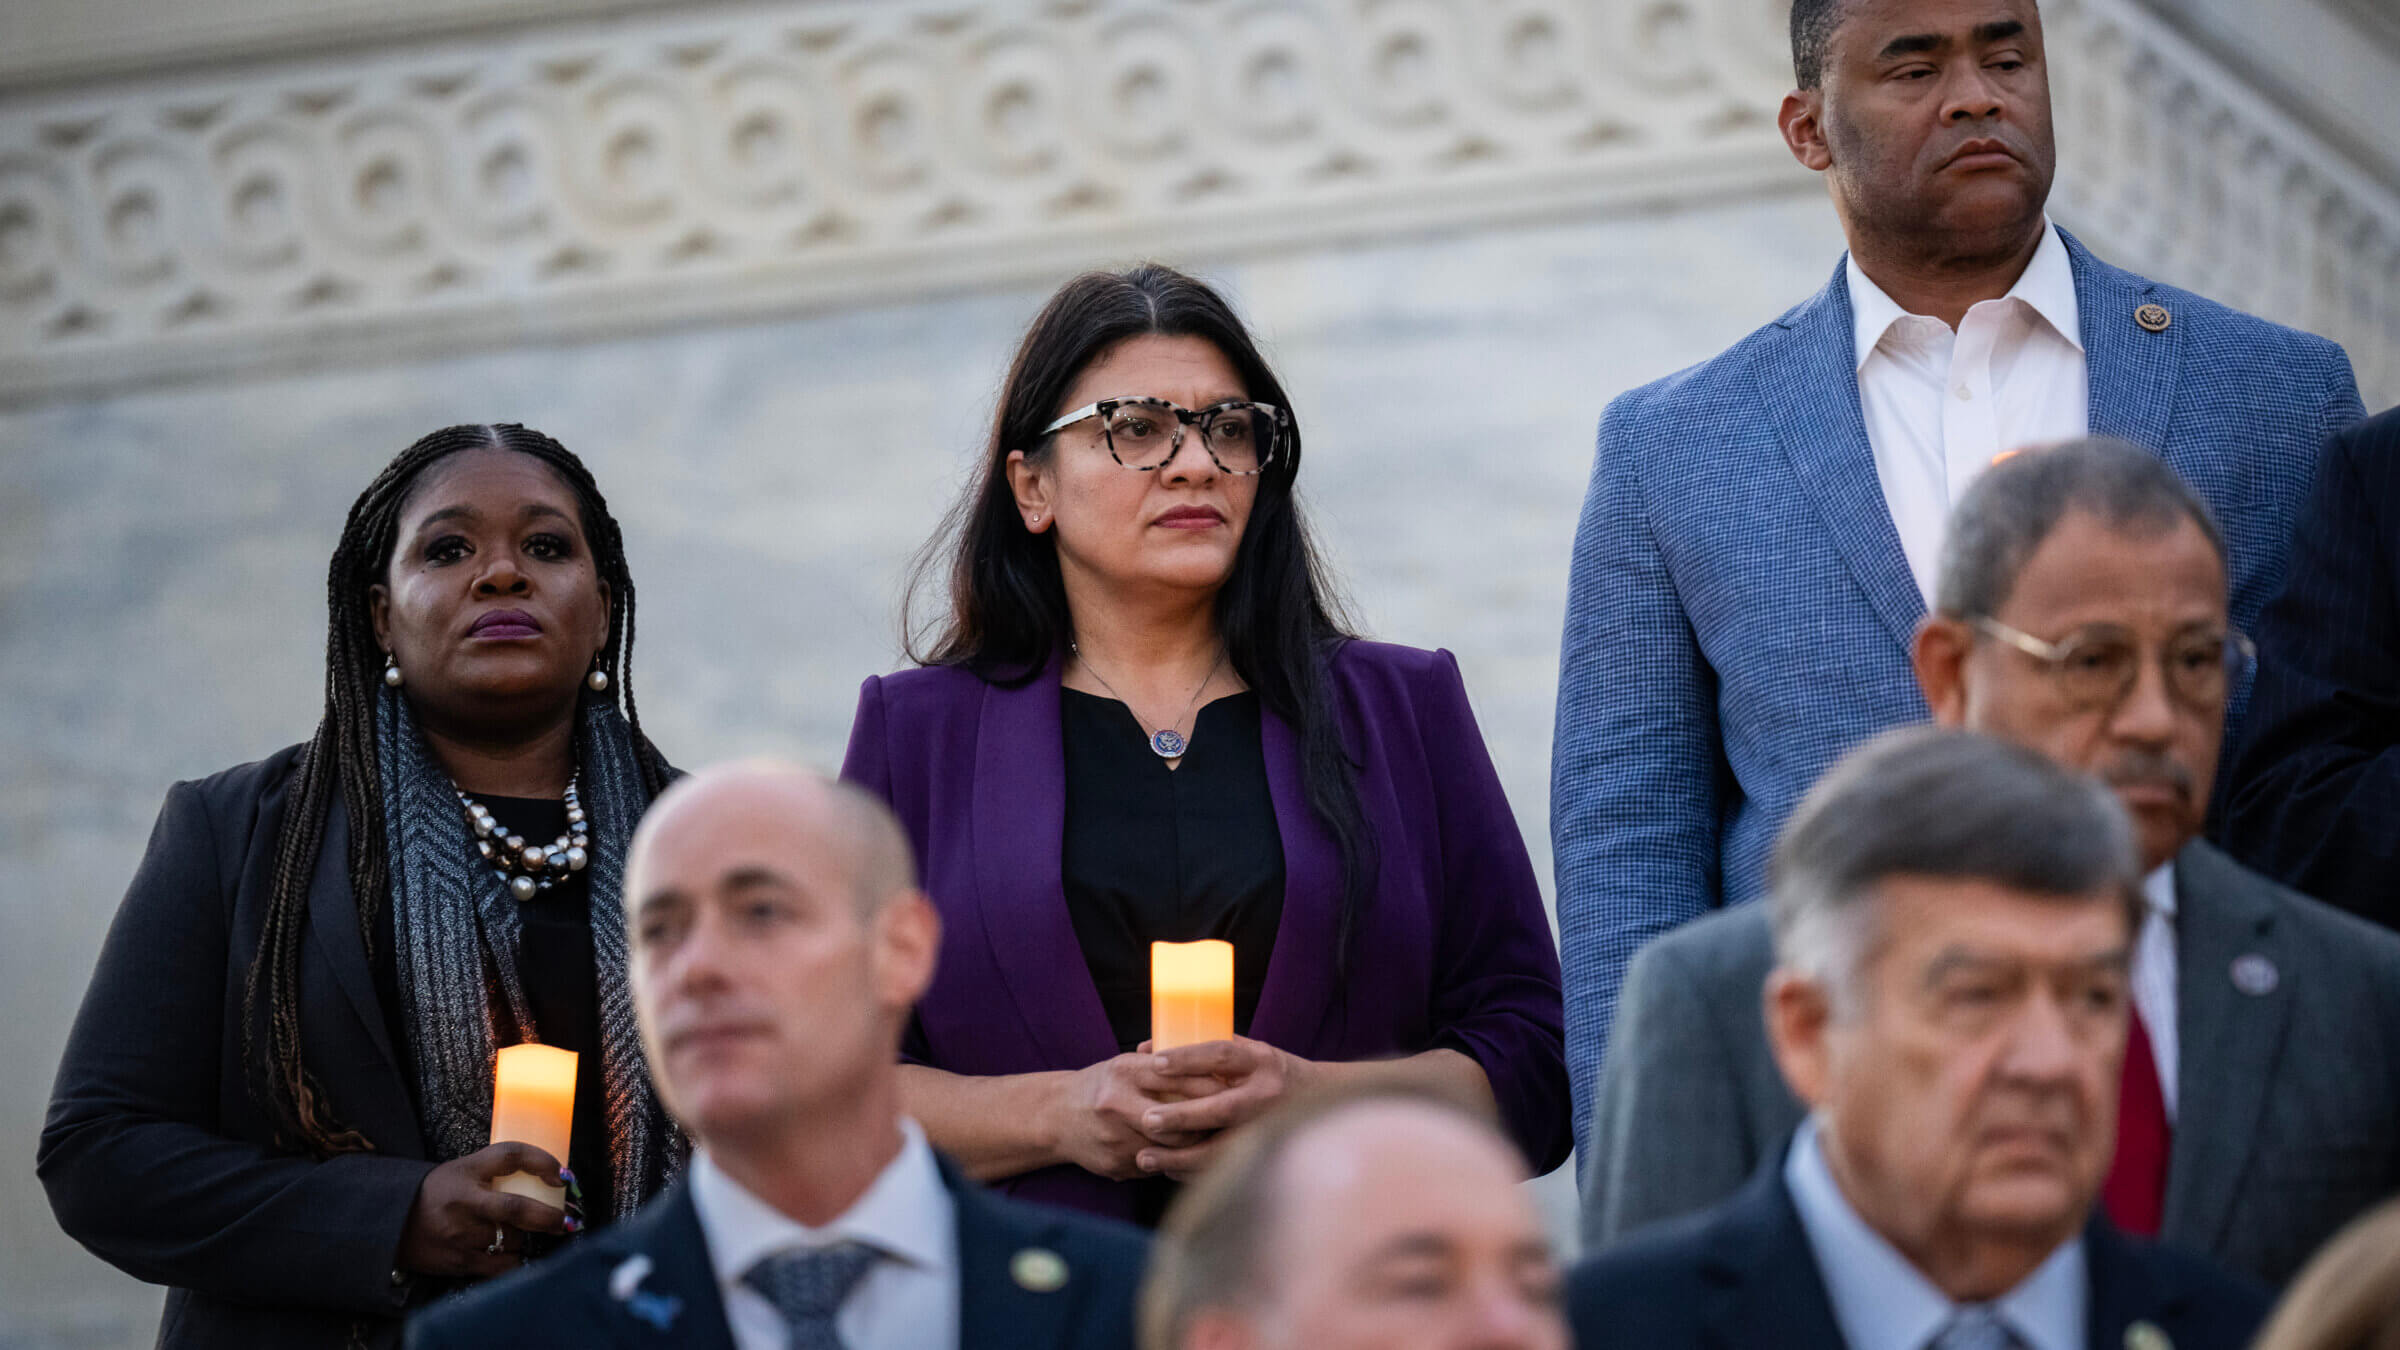 Rep. Rashida Tlaib (D-MI), center, attended a bipartisan candlelight vigil with members of Congress to commemorate one month since the Hamas terrorist attacks in Israel on Oct. 7 in Washington, DC